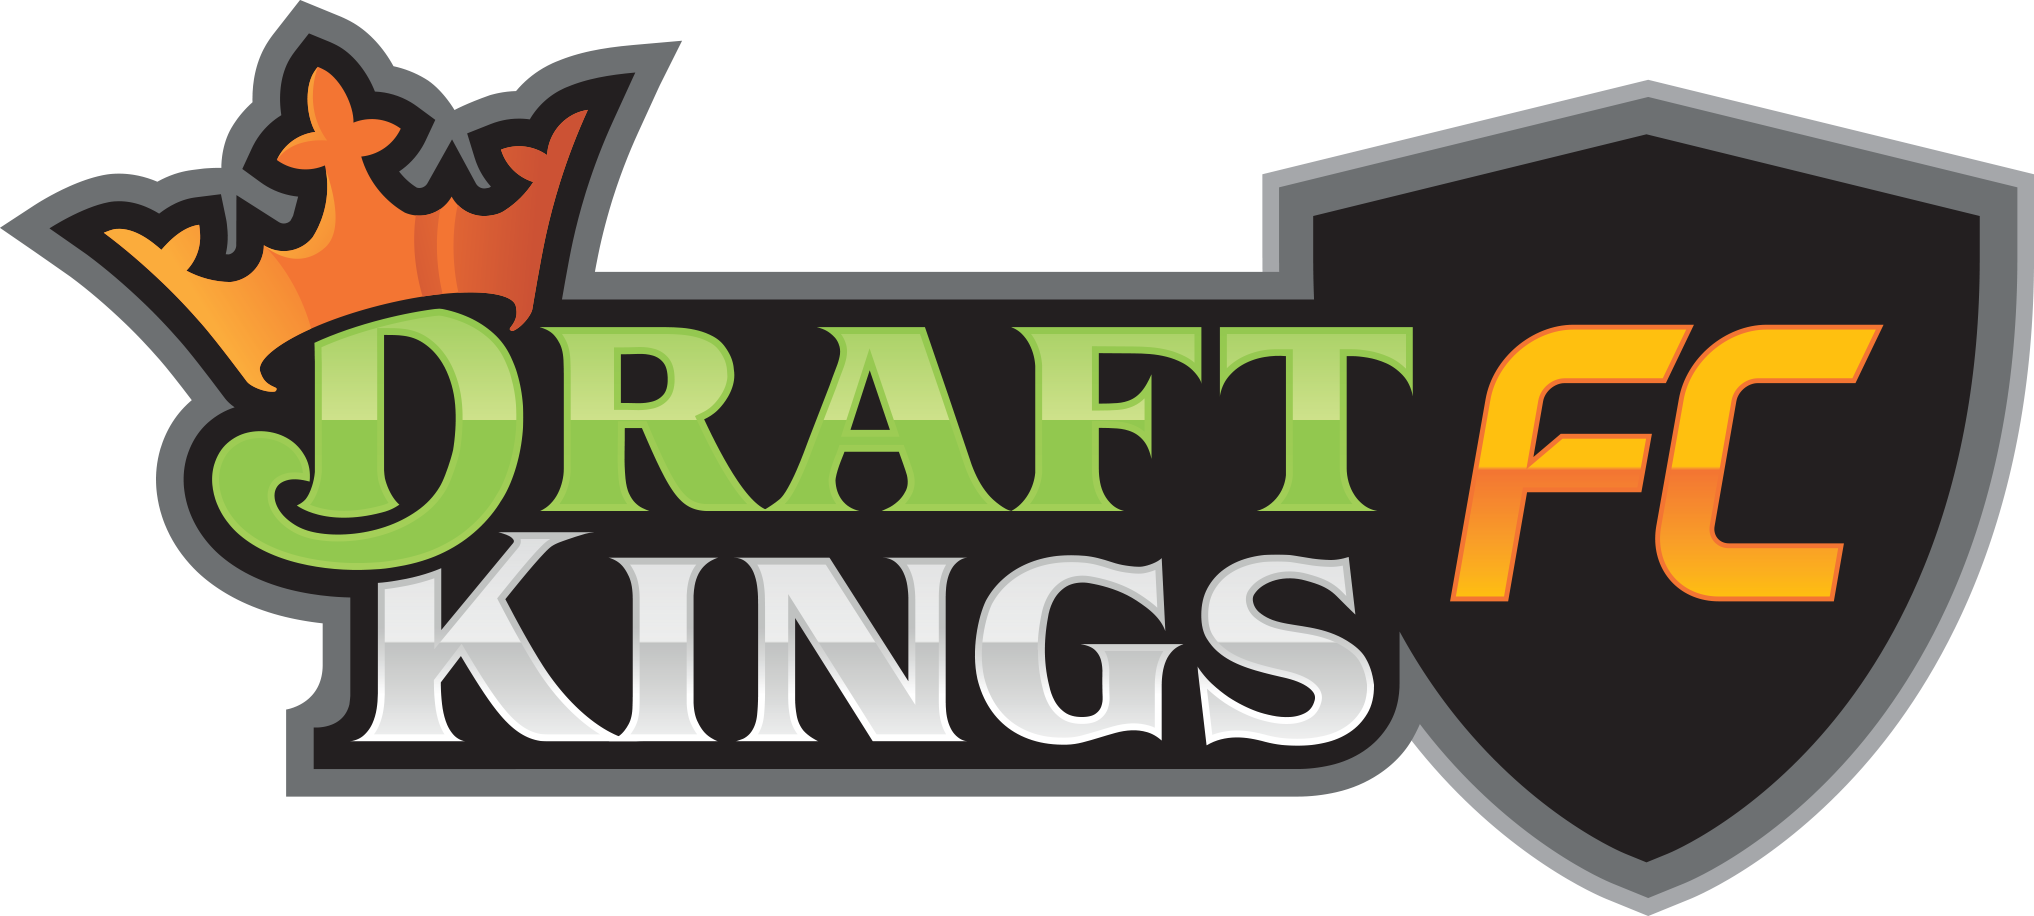 DraftKings Euros $10K Striker Contest With $10K Guaranteed